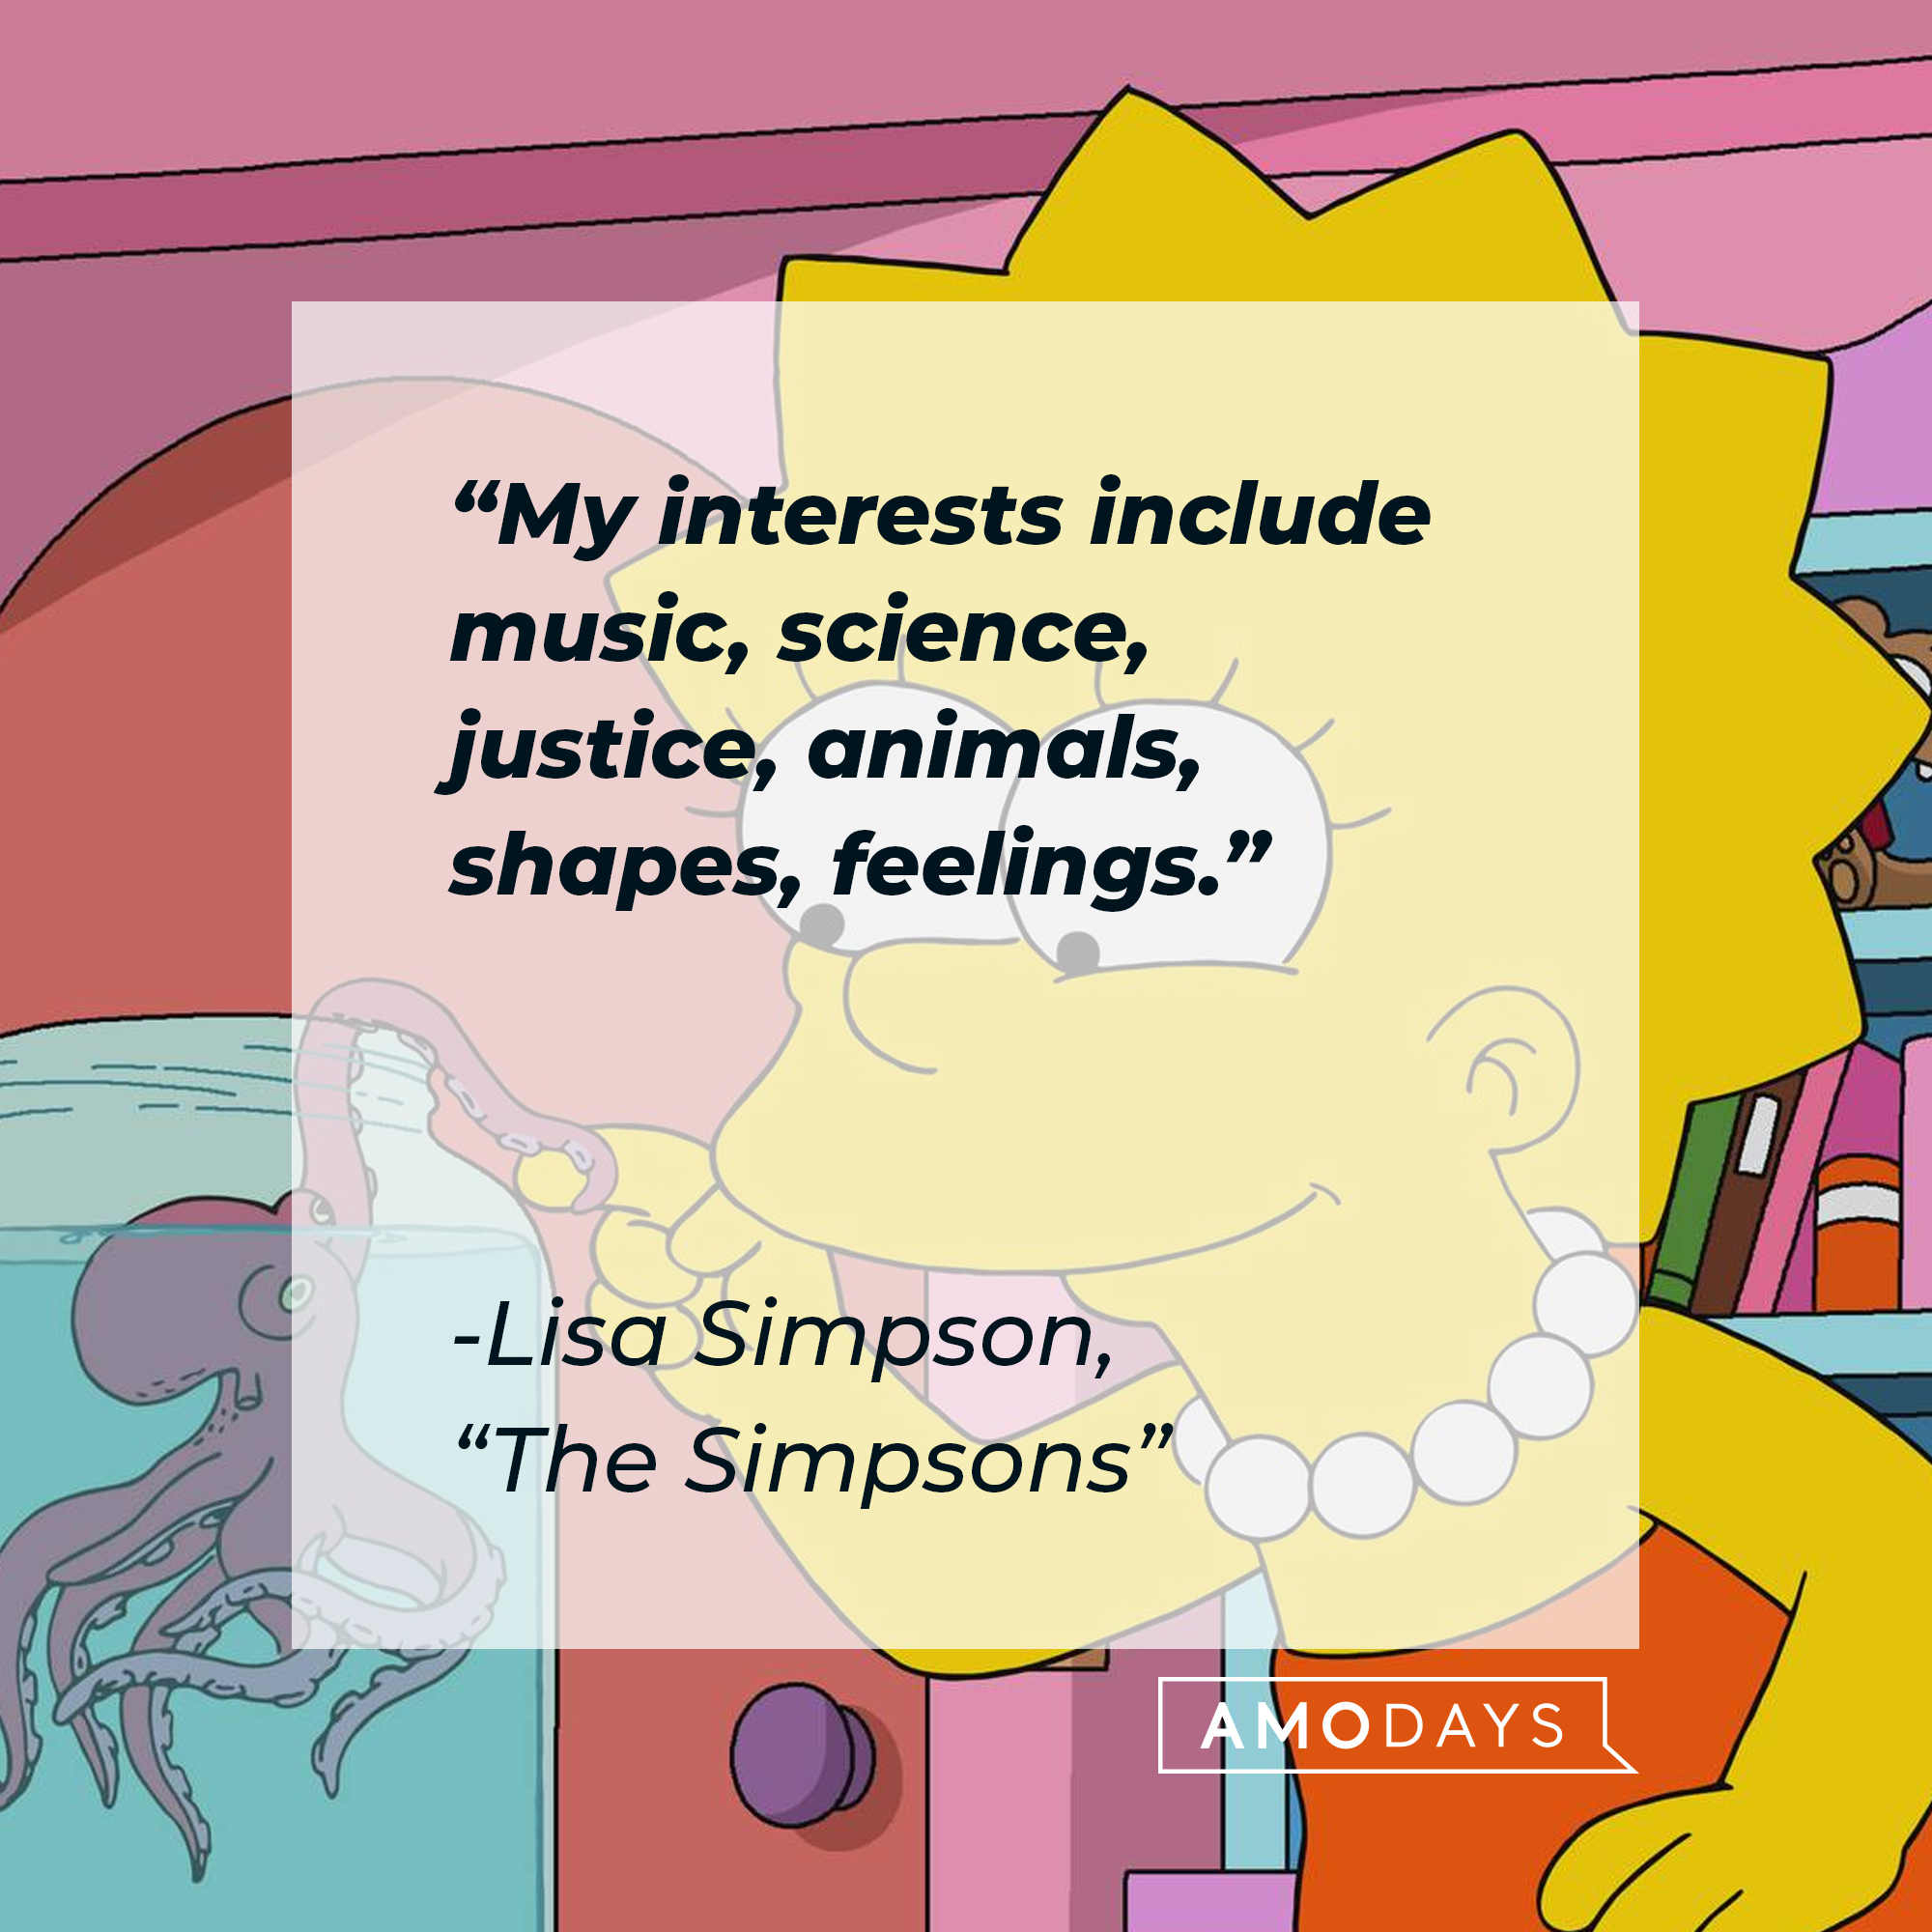 Lisa Simpson with her quote: "My interests include music, science, justice, animals, shapes, feelings." | Source: Facebook.com/TheSimpsons